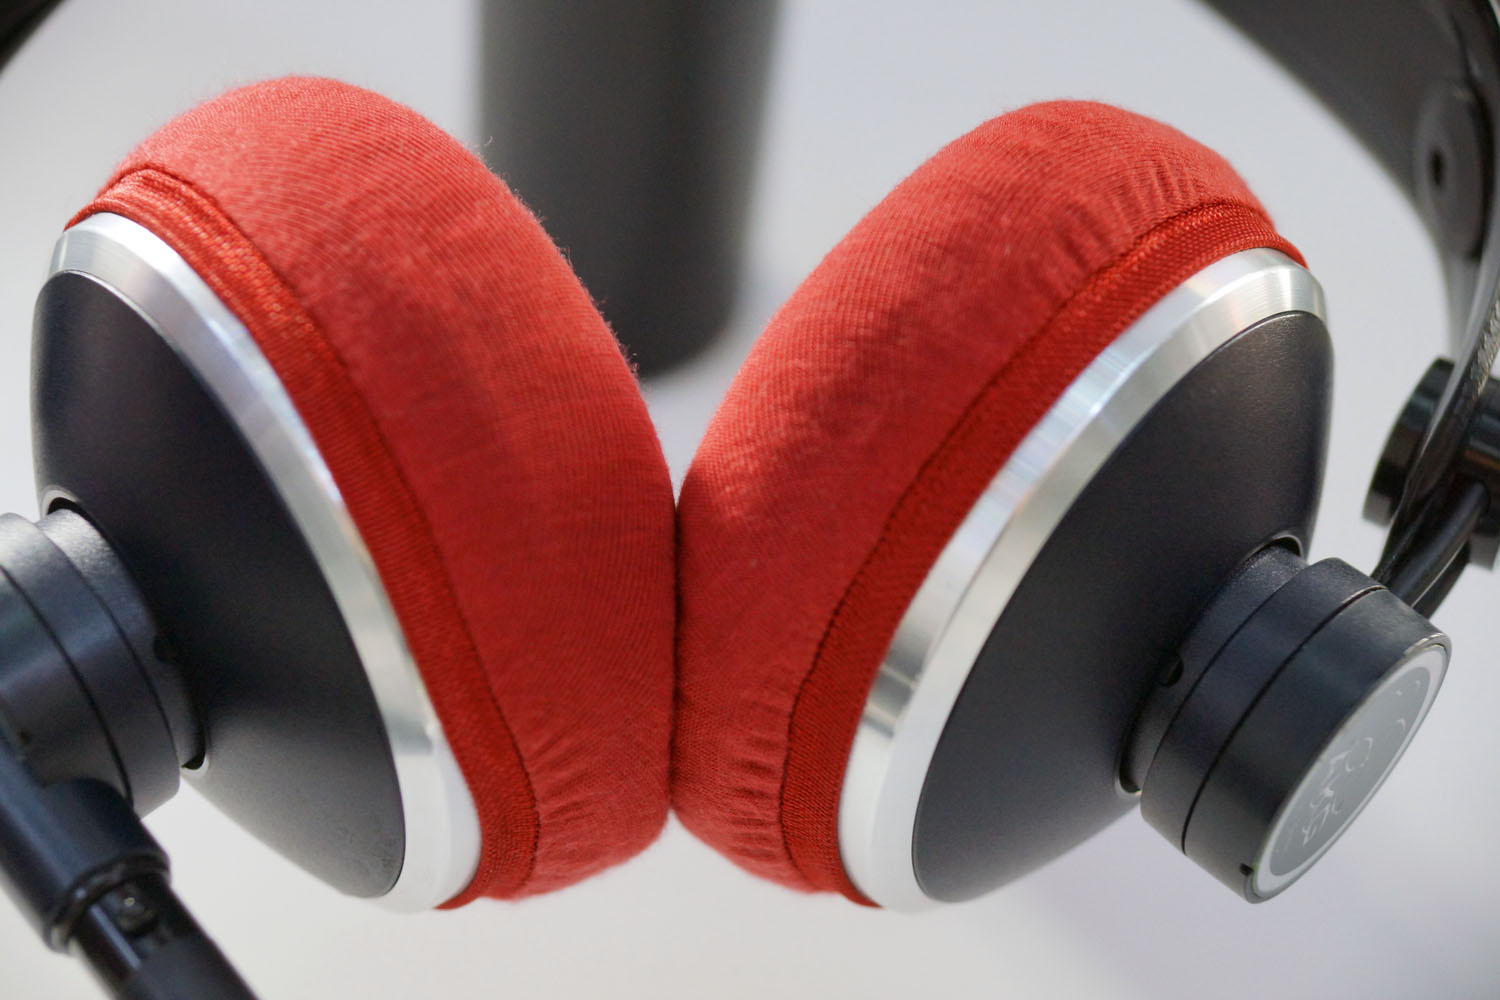 AKG K171 MKII earpad repair and protection: Super Stretch 